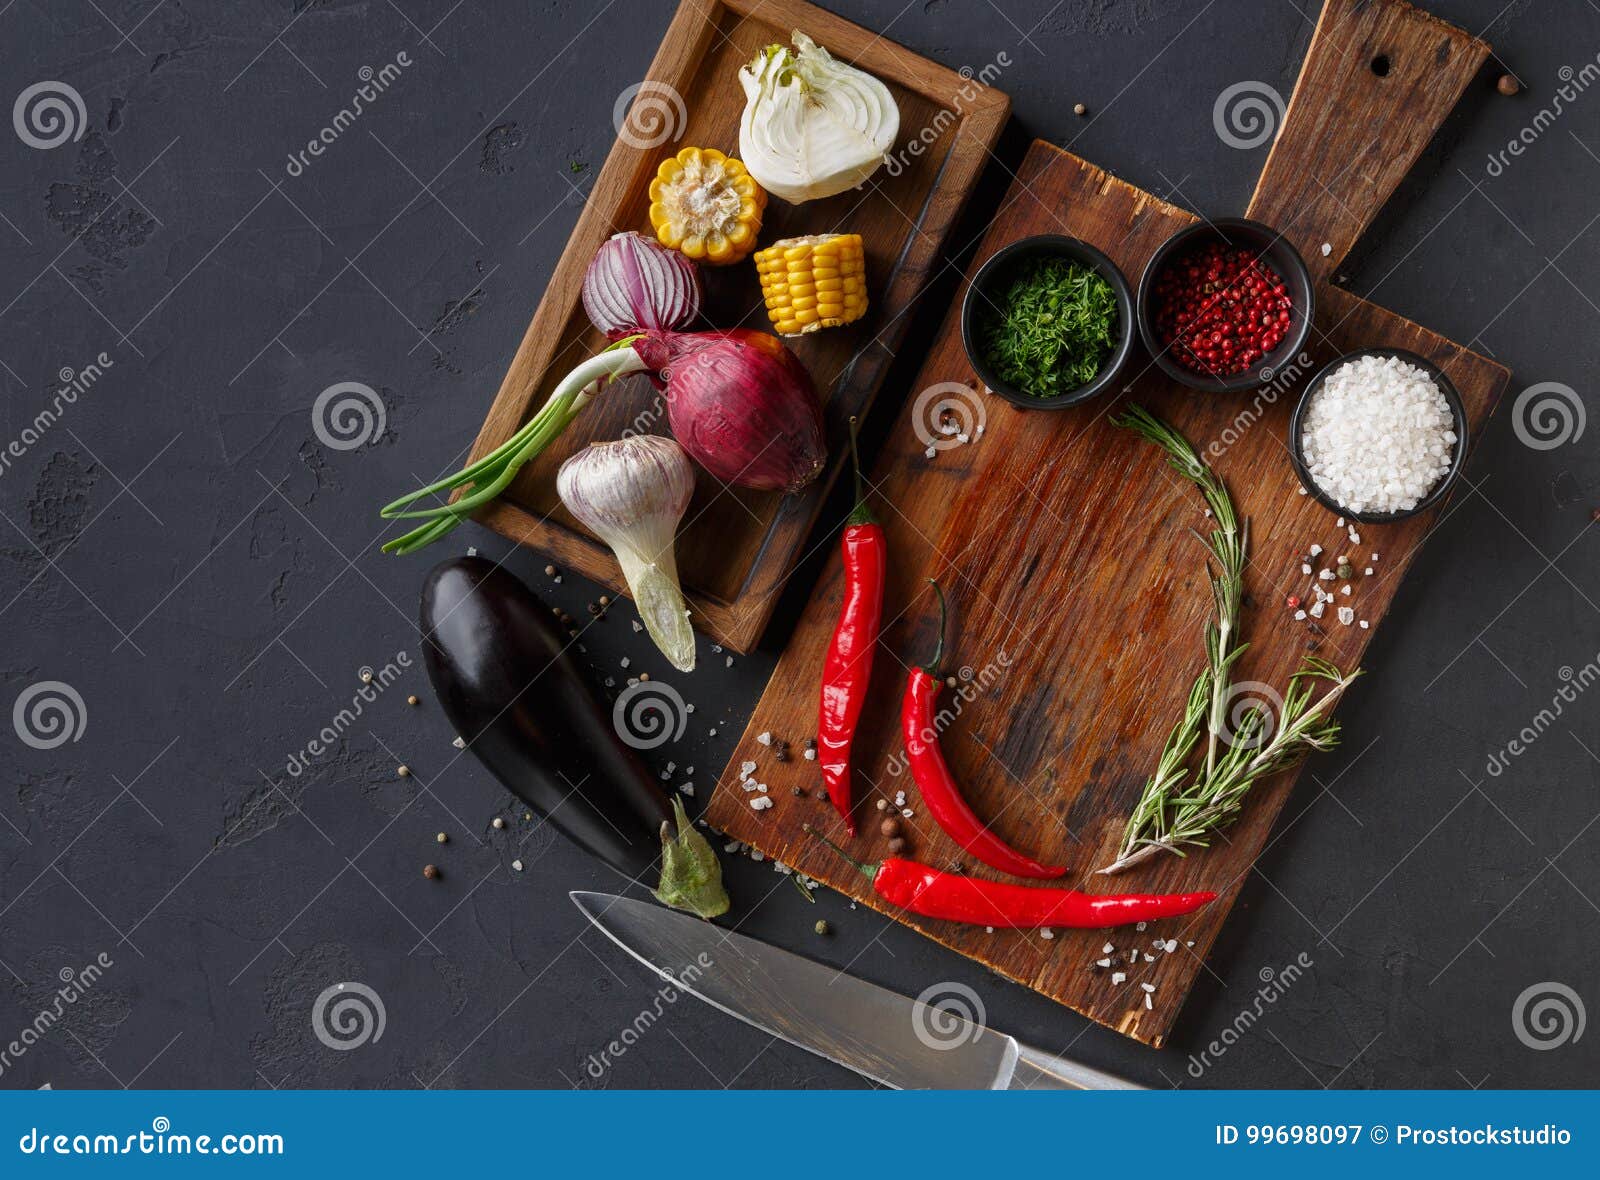 Wooden Desk with Spices and Chilli, Diverse Cooking Ingredients in a ...